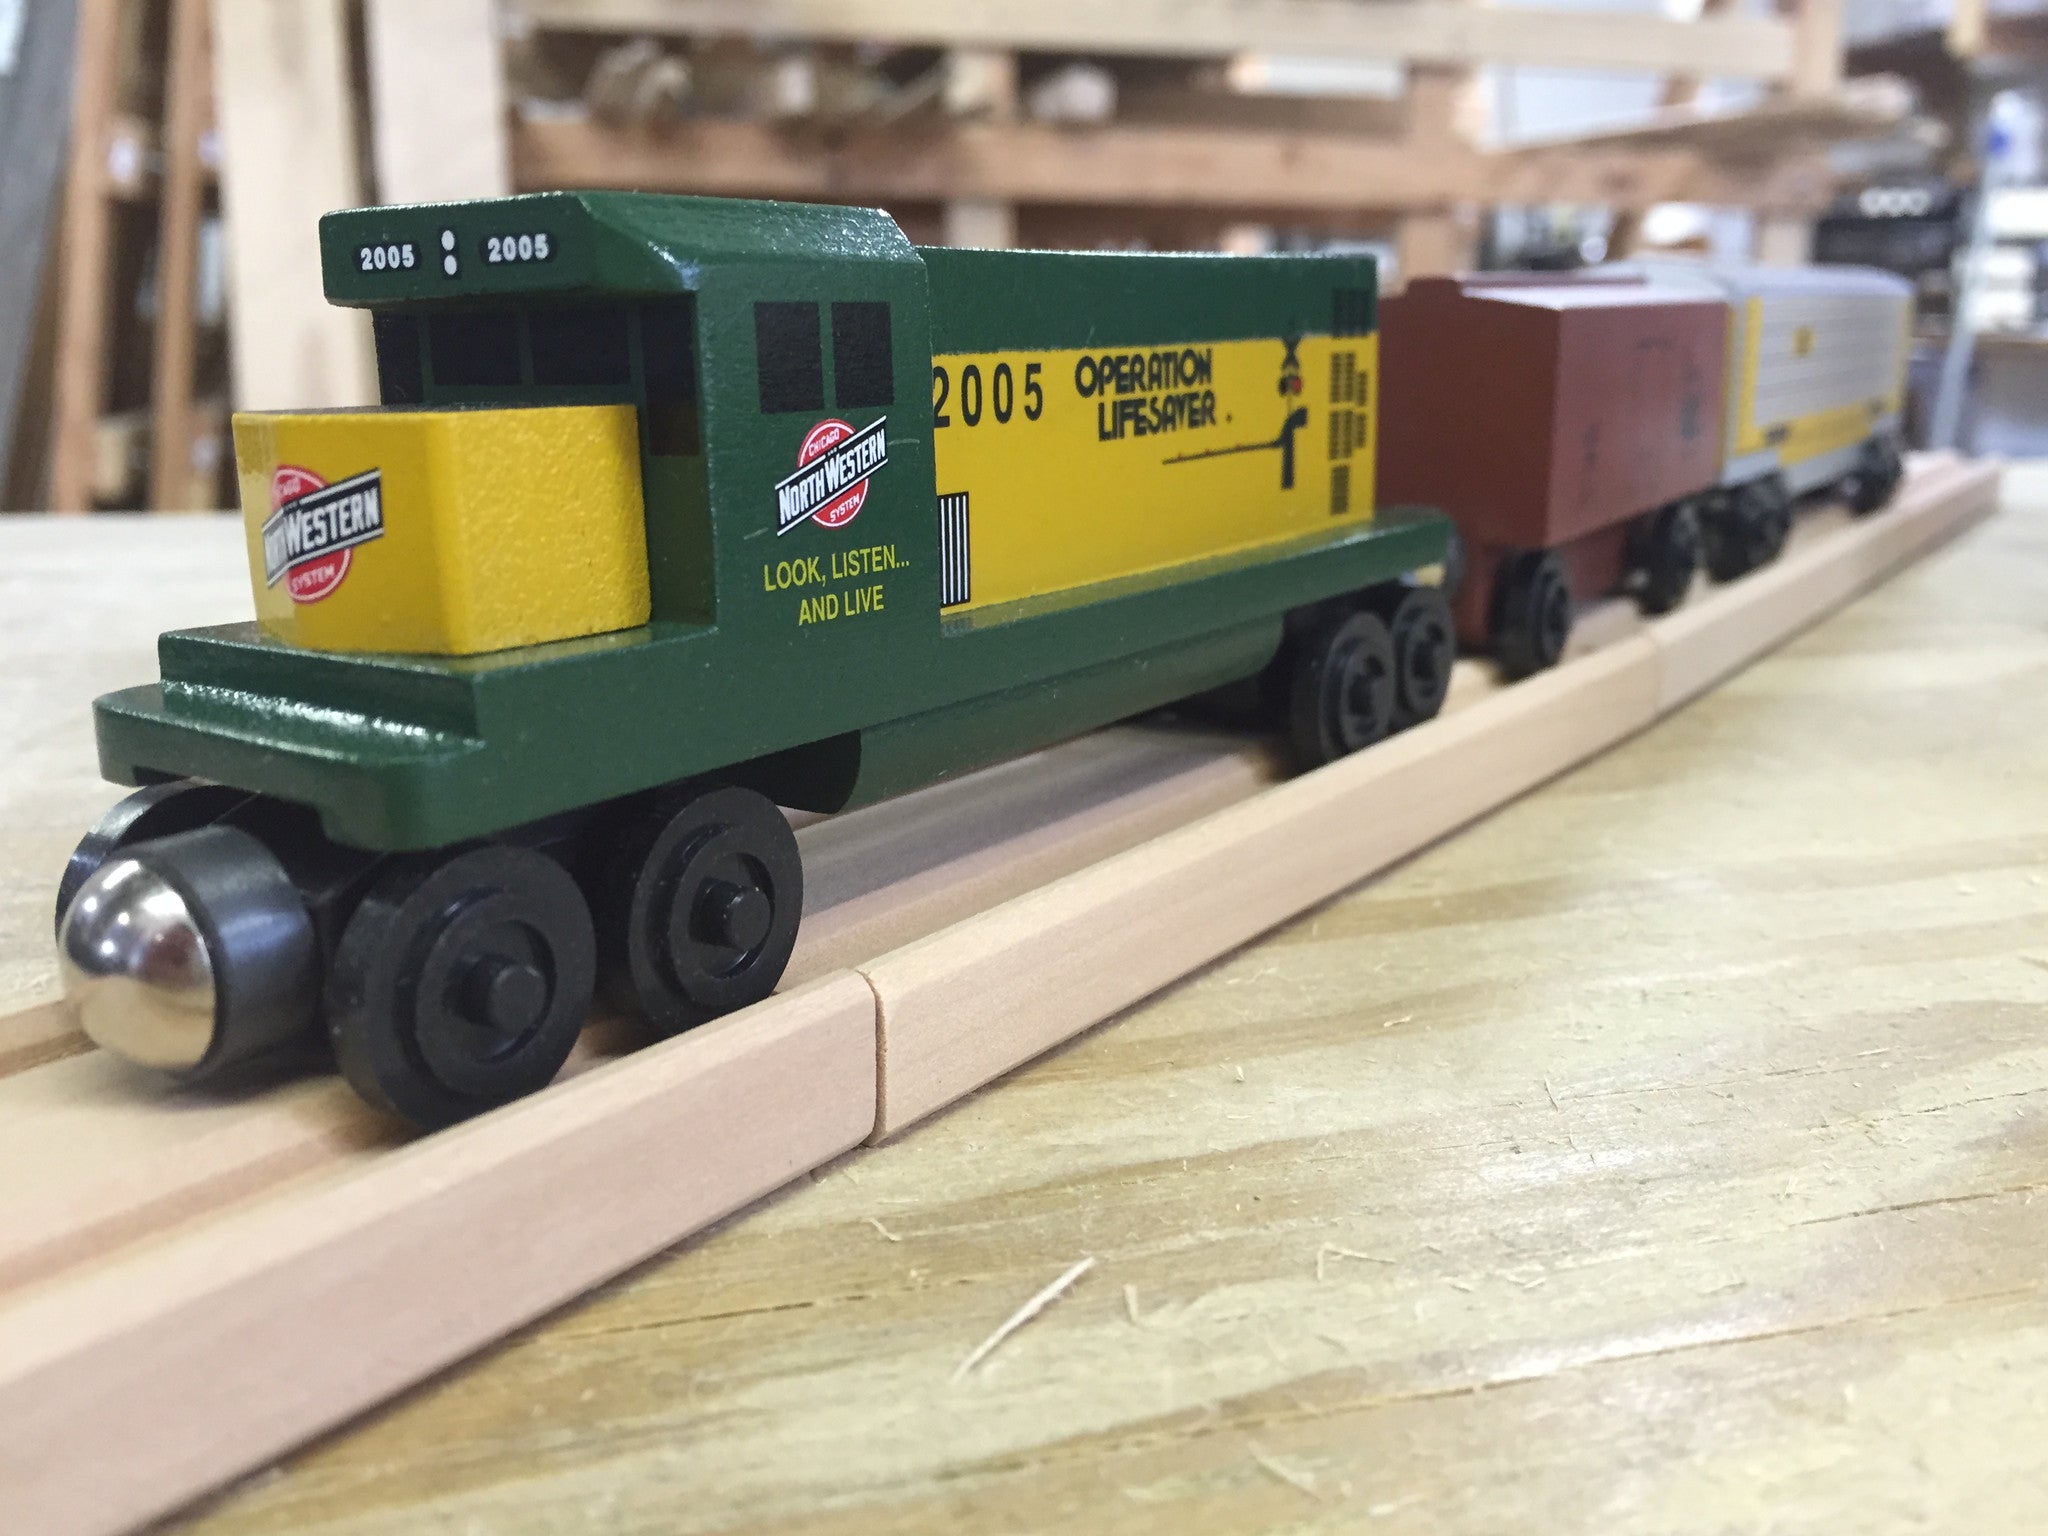 Whittle Shortline Railroad Chicago and Northwestern GP-38 Diesel Engine Wooden Toy Train with other Whittle Trains